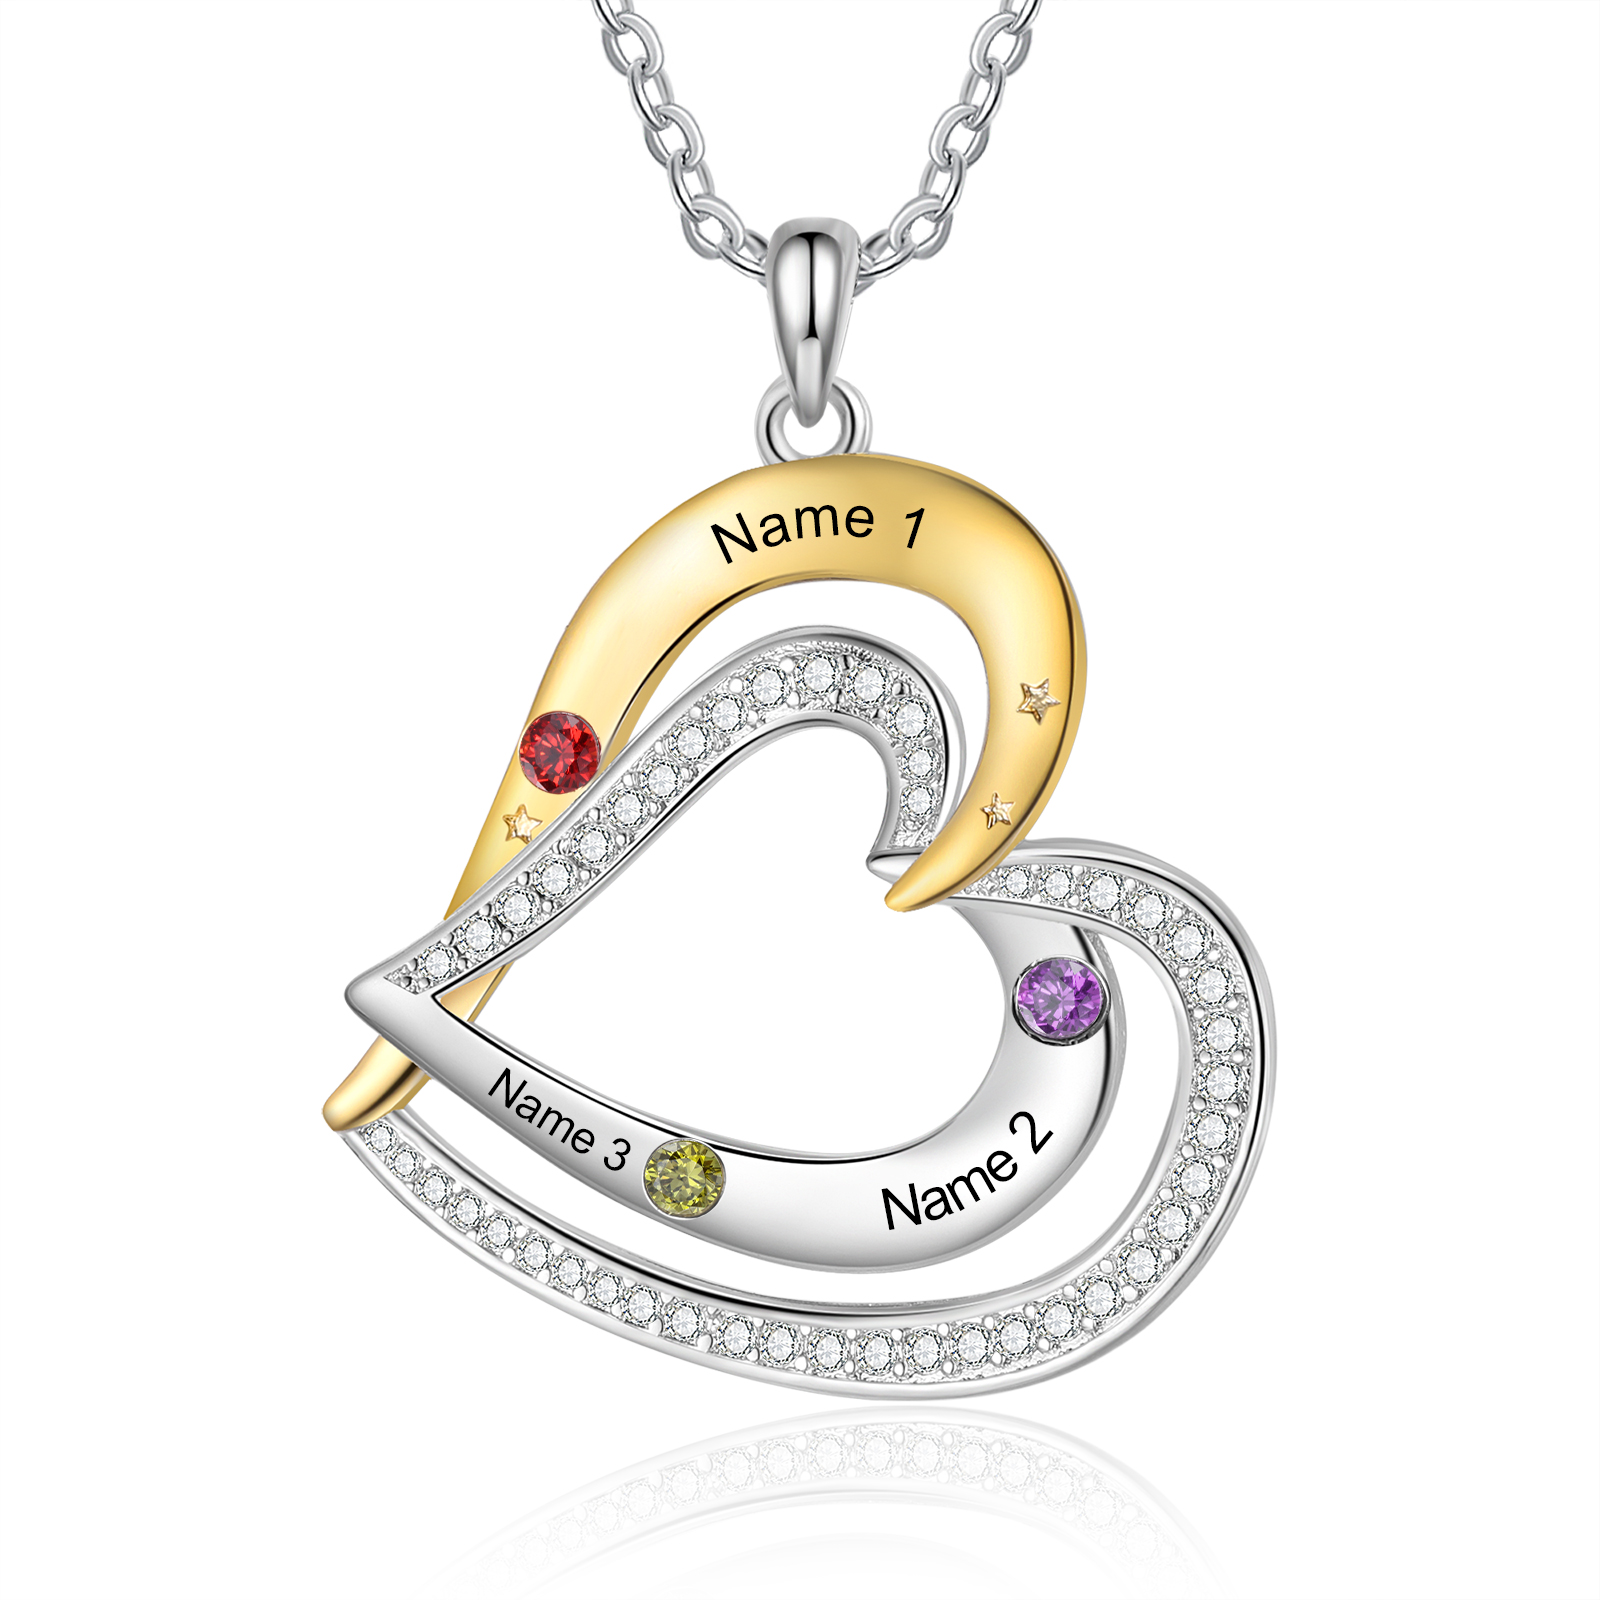 3 Names - Personalized Love Necklace with Customized Name and Birthstone, A Special Gift for Her